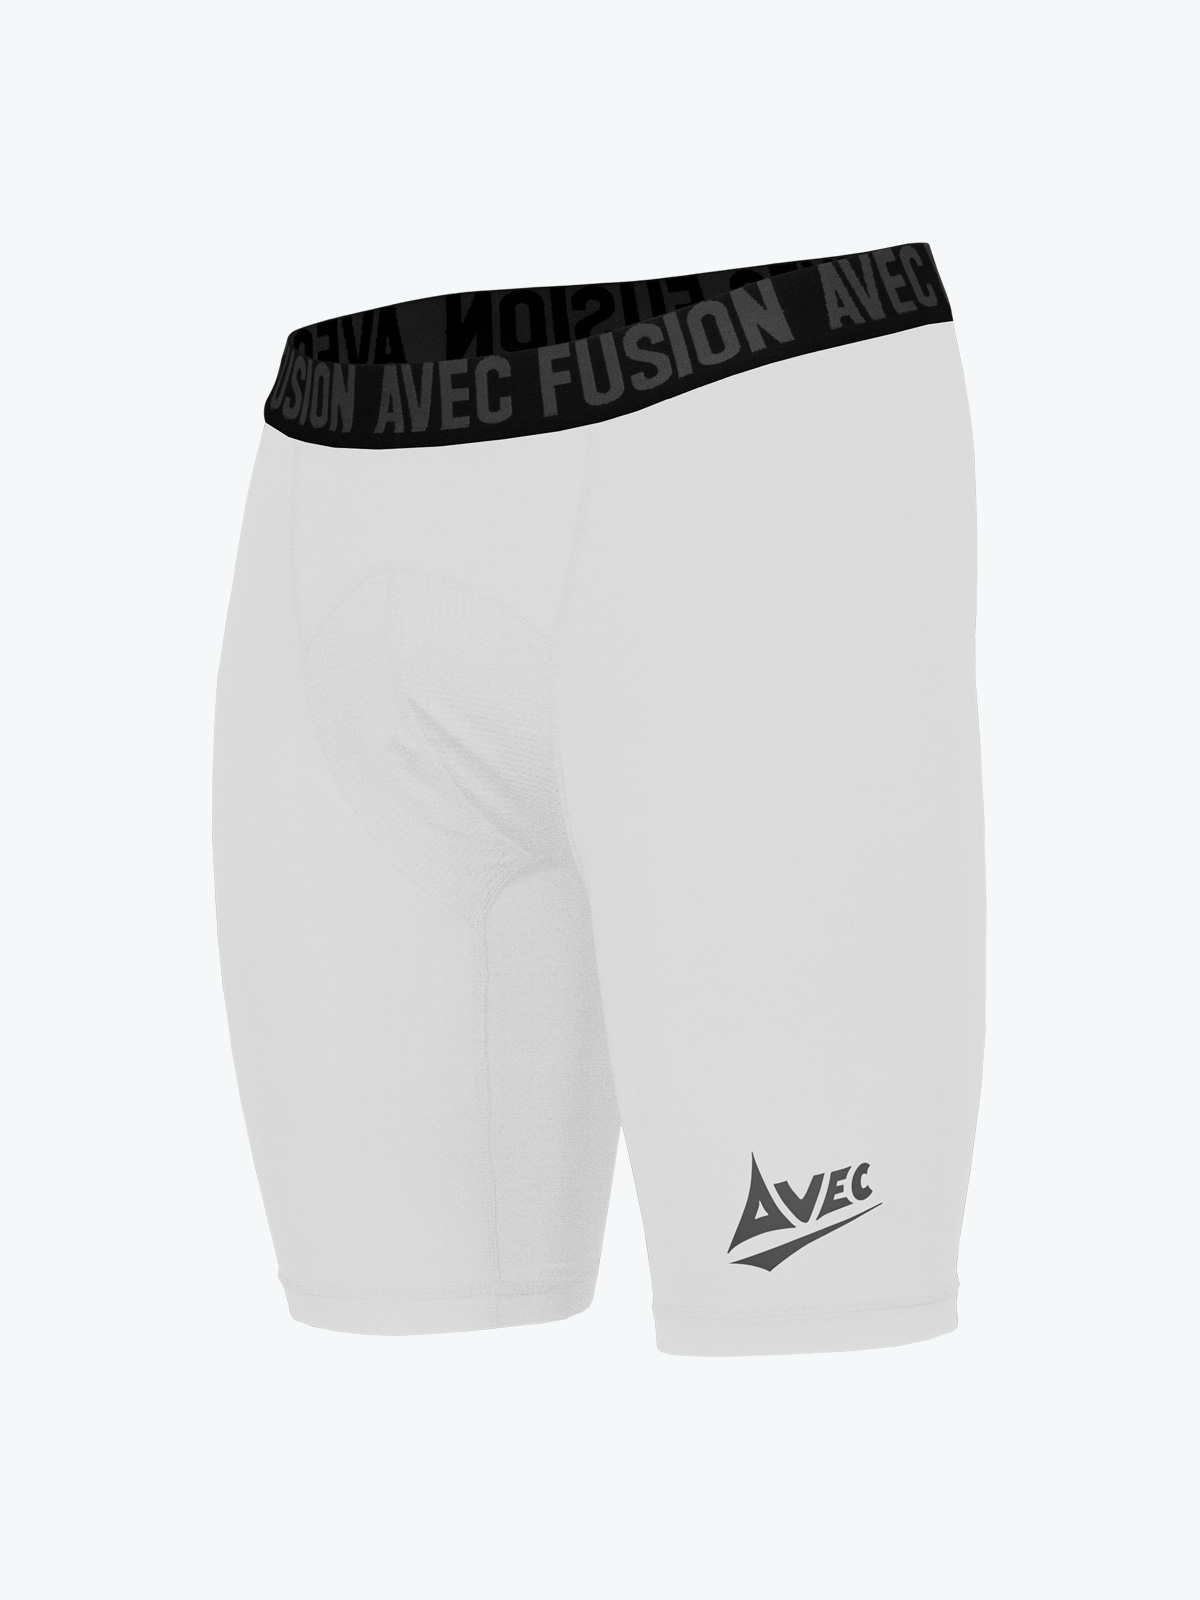 picture of fusion body fit short - white